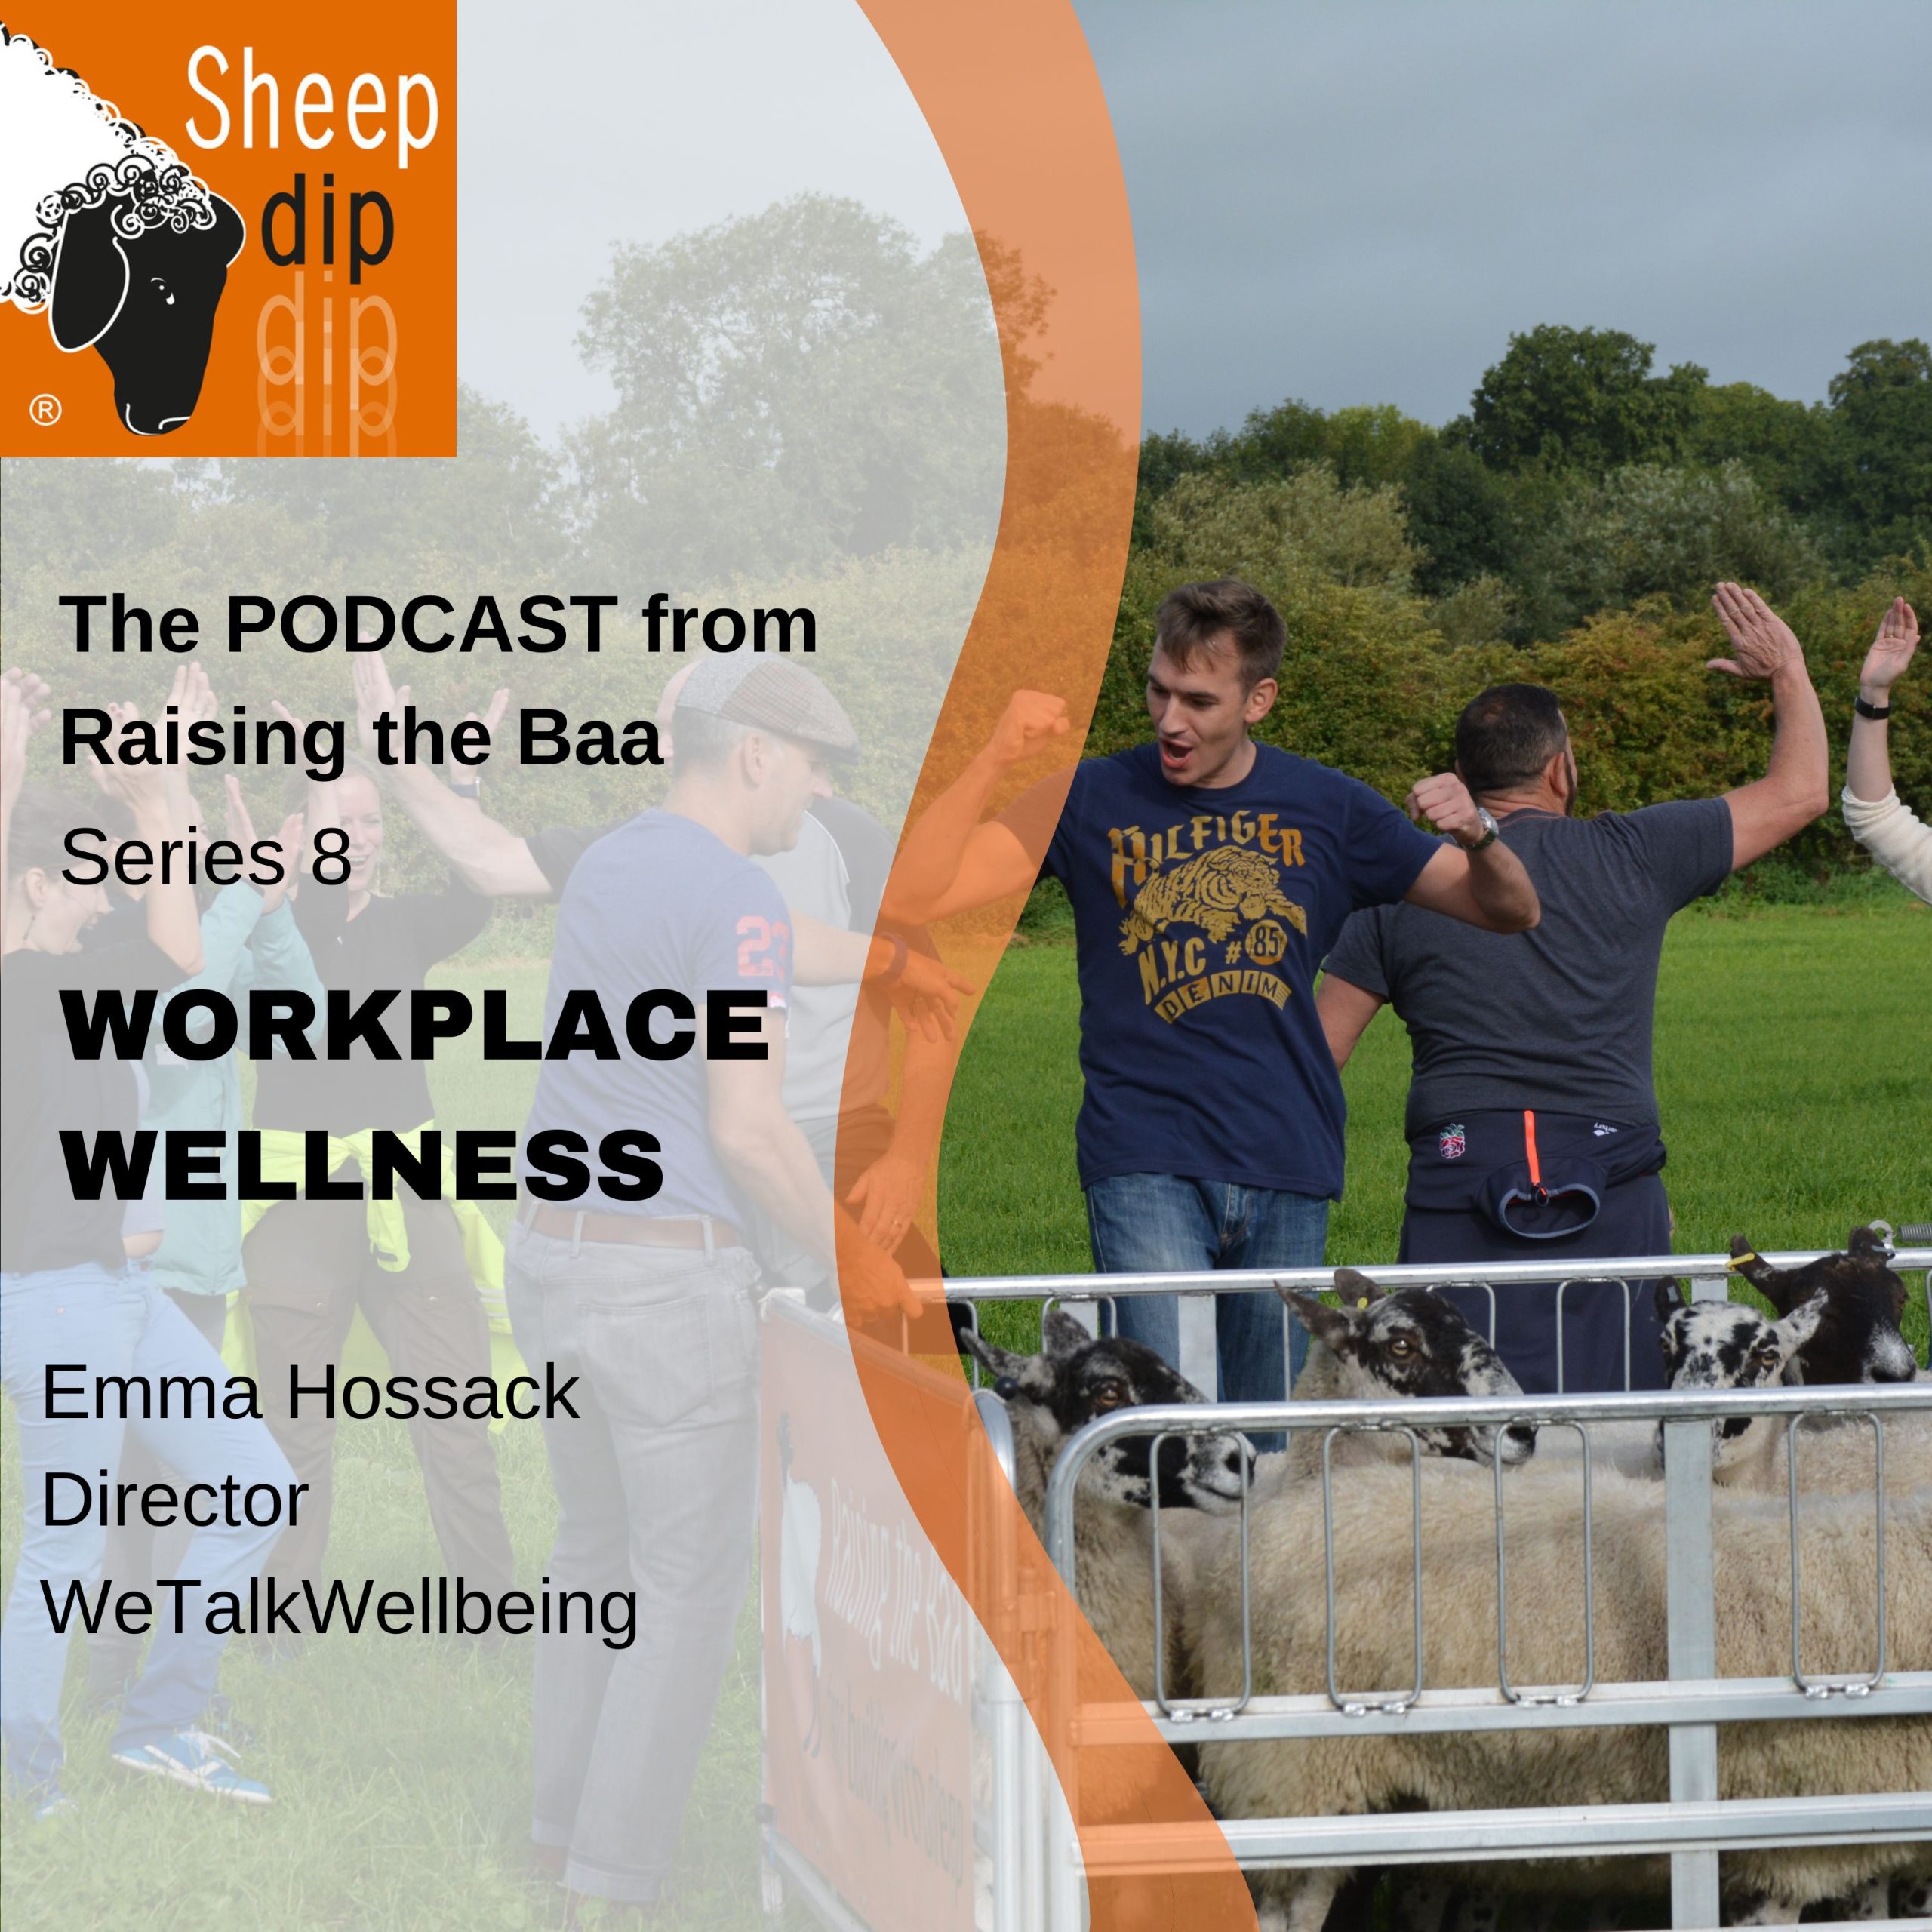 Workplace Wellbeing - with Emma Hossack, WeTalkWellbeing - Workplace Wellness podcast (7)